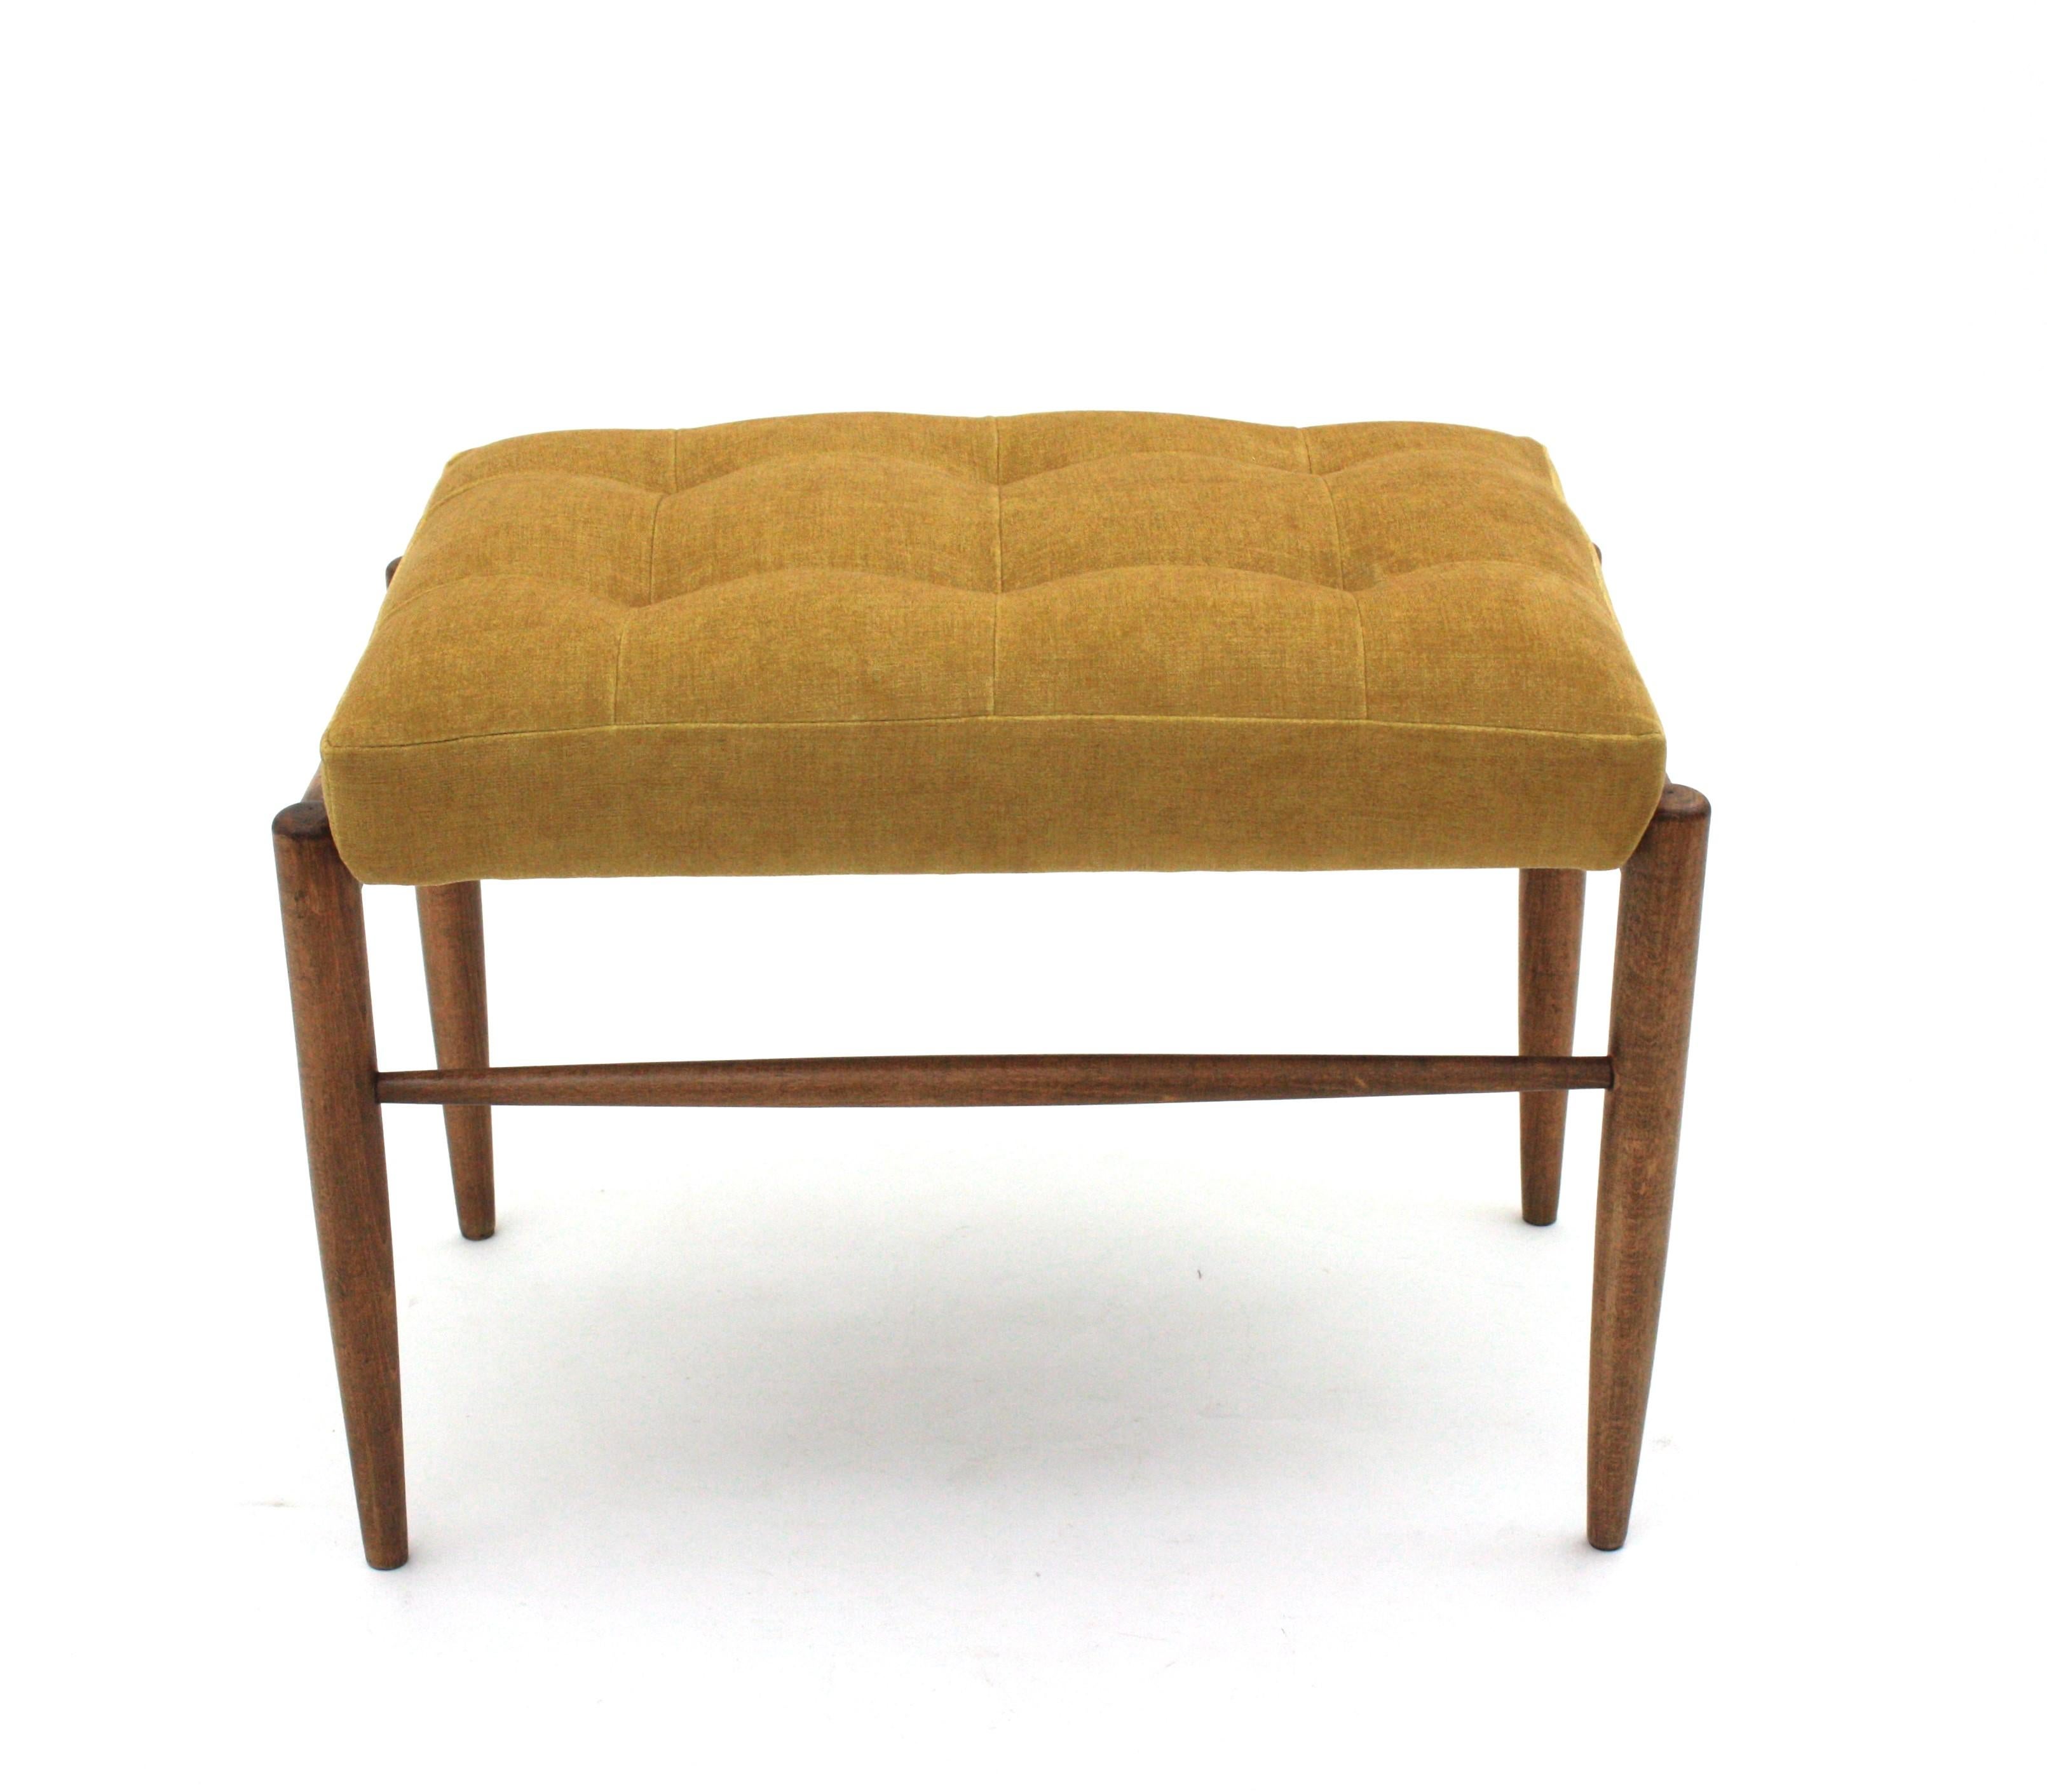 Mid-Century Modern Scandinavian Modern Stool Ottoman or Bench New Upholstered in Yellow Chenille For Sale